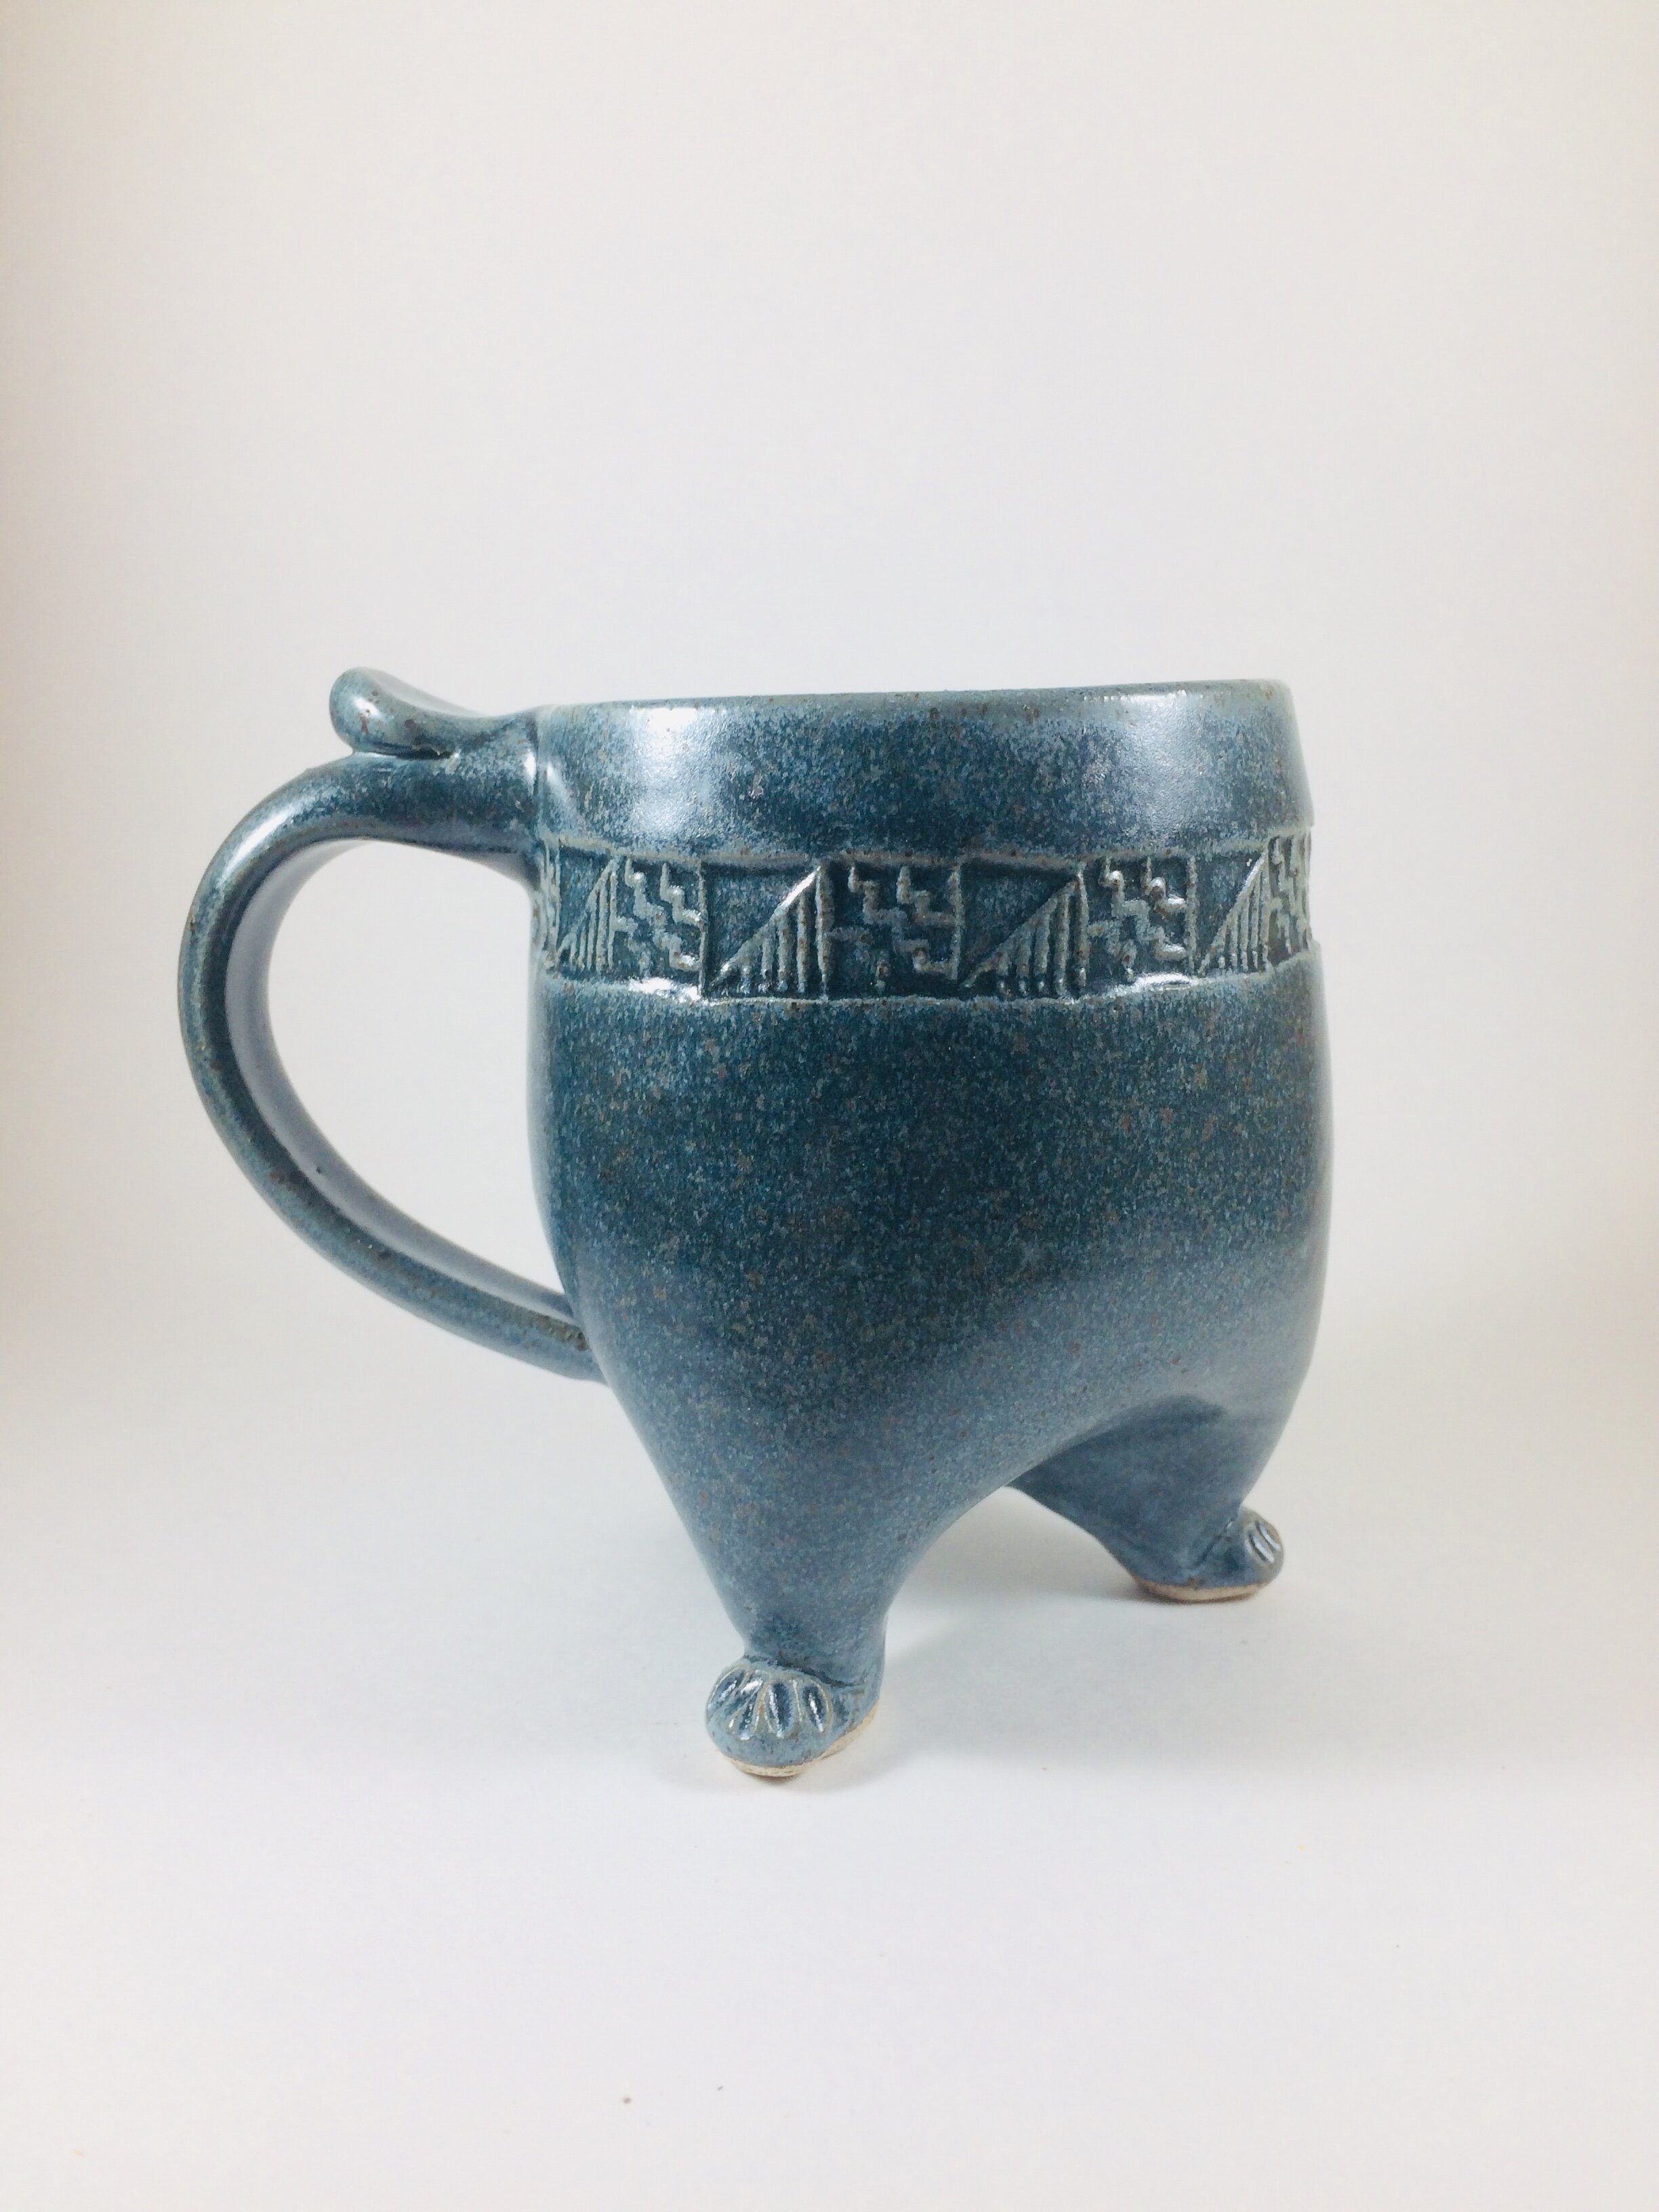 Custom Made Footed Mug Handcrafted by Michael Gibbons of Nutfield Pottery, Derry, New Hampshire USA